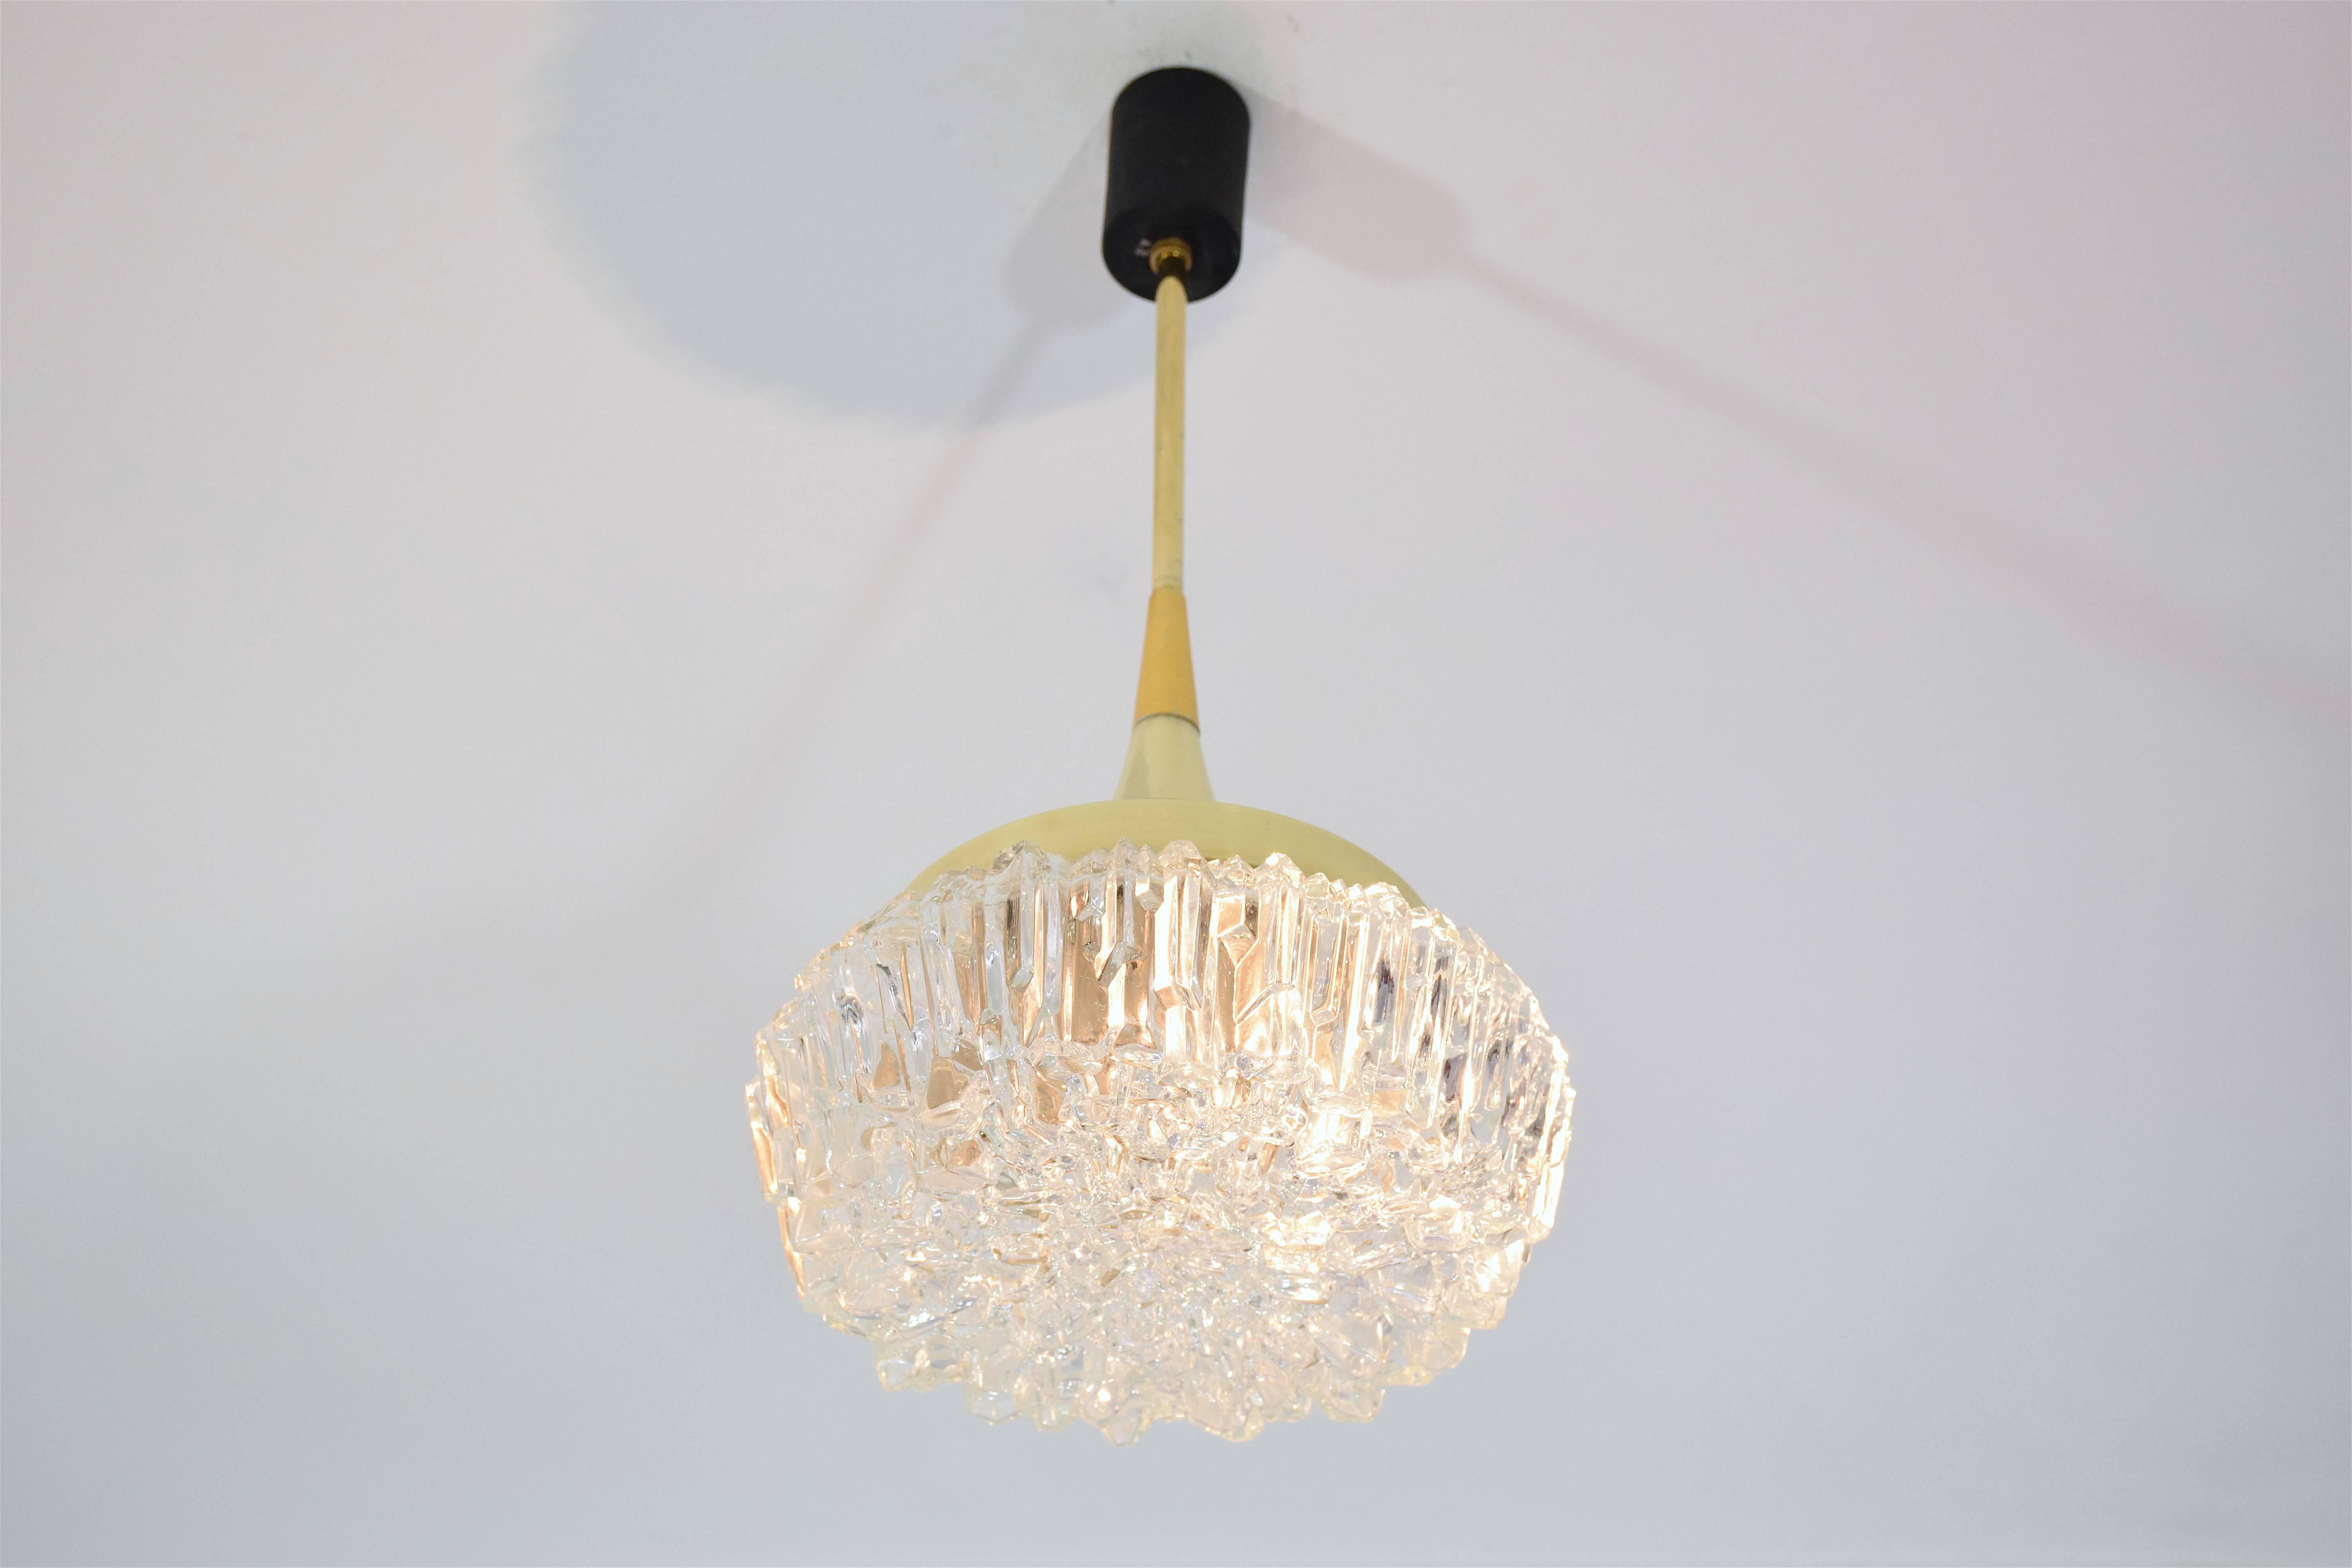 20th Century French Mid-Century Brass Glass Pendant Light Attributed to Arlus, 1950s